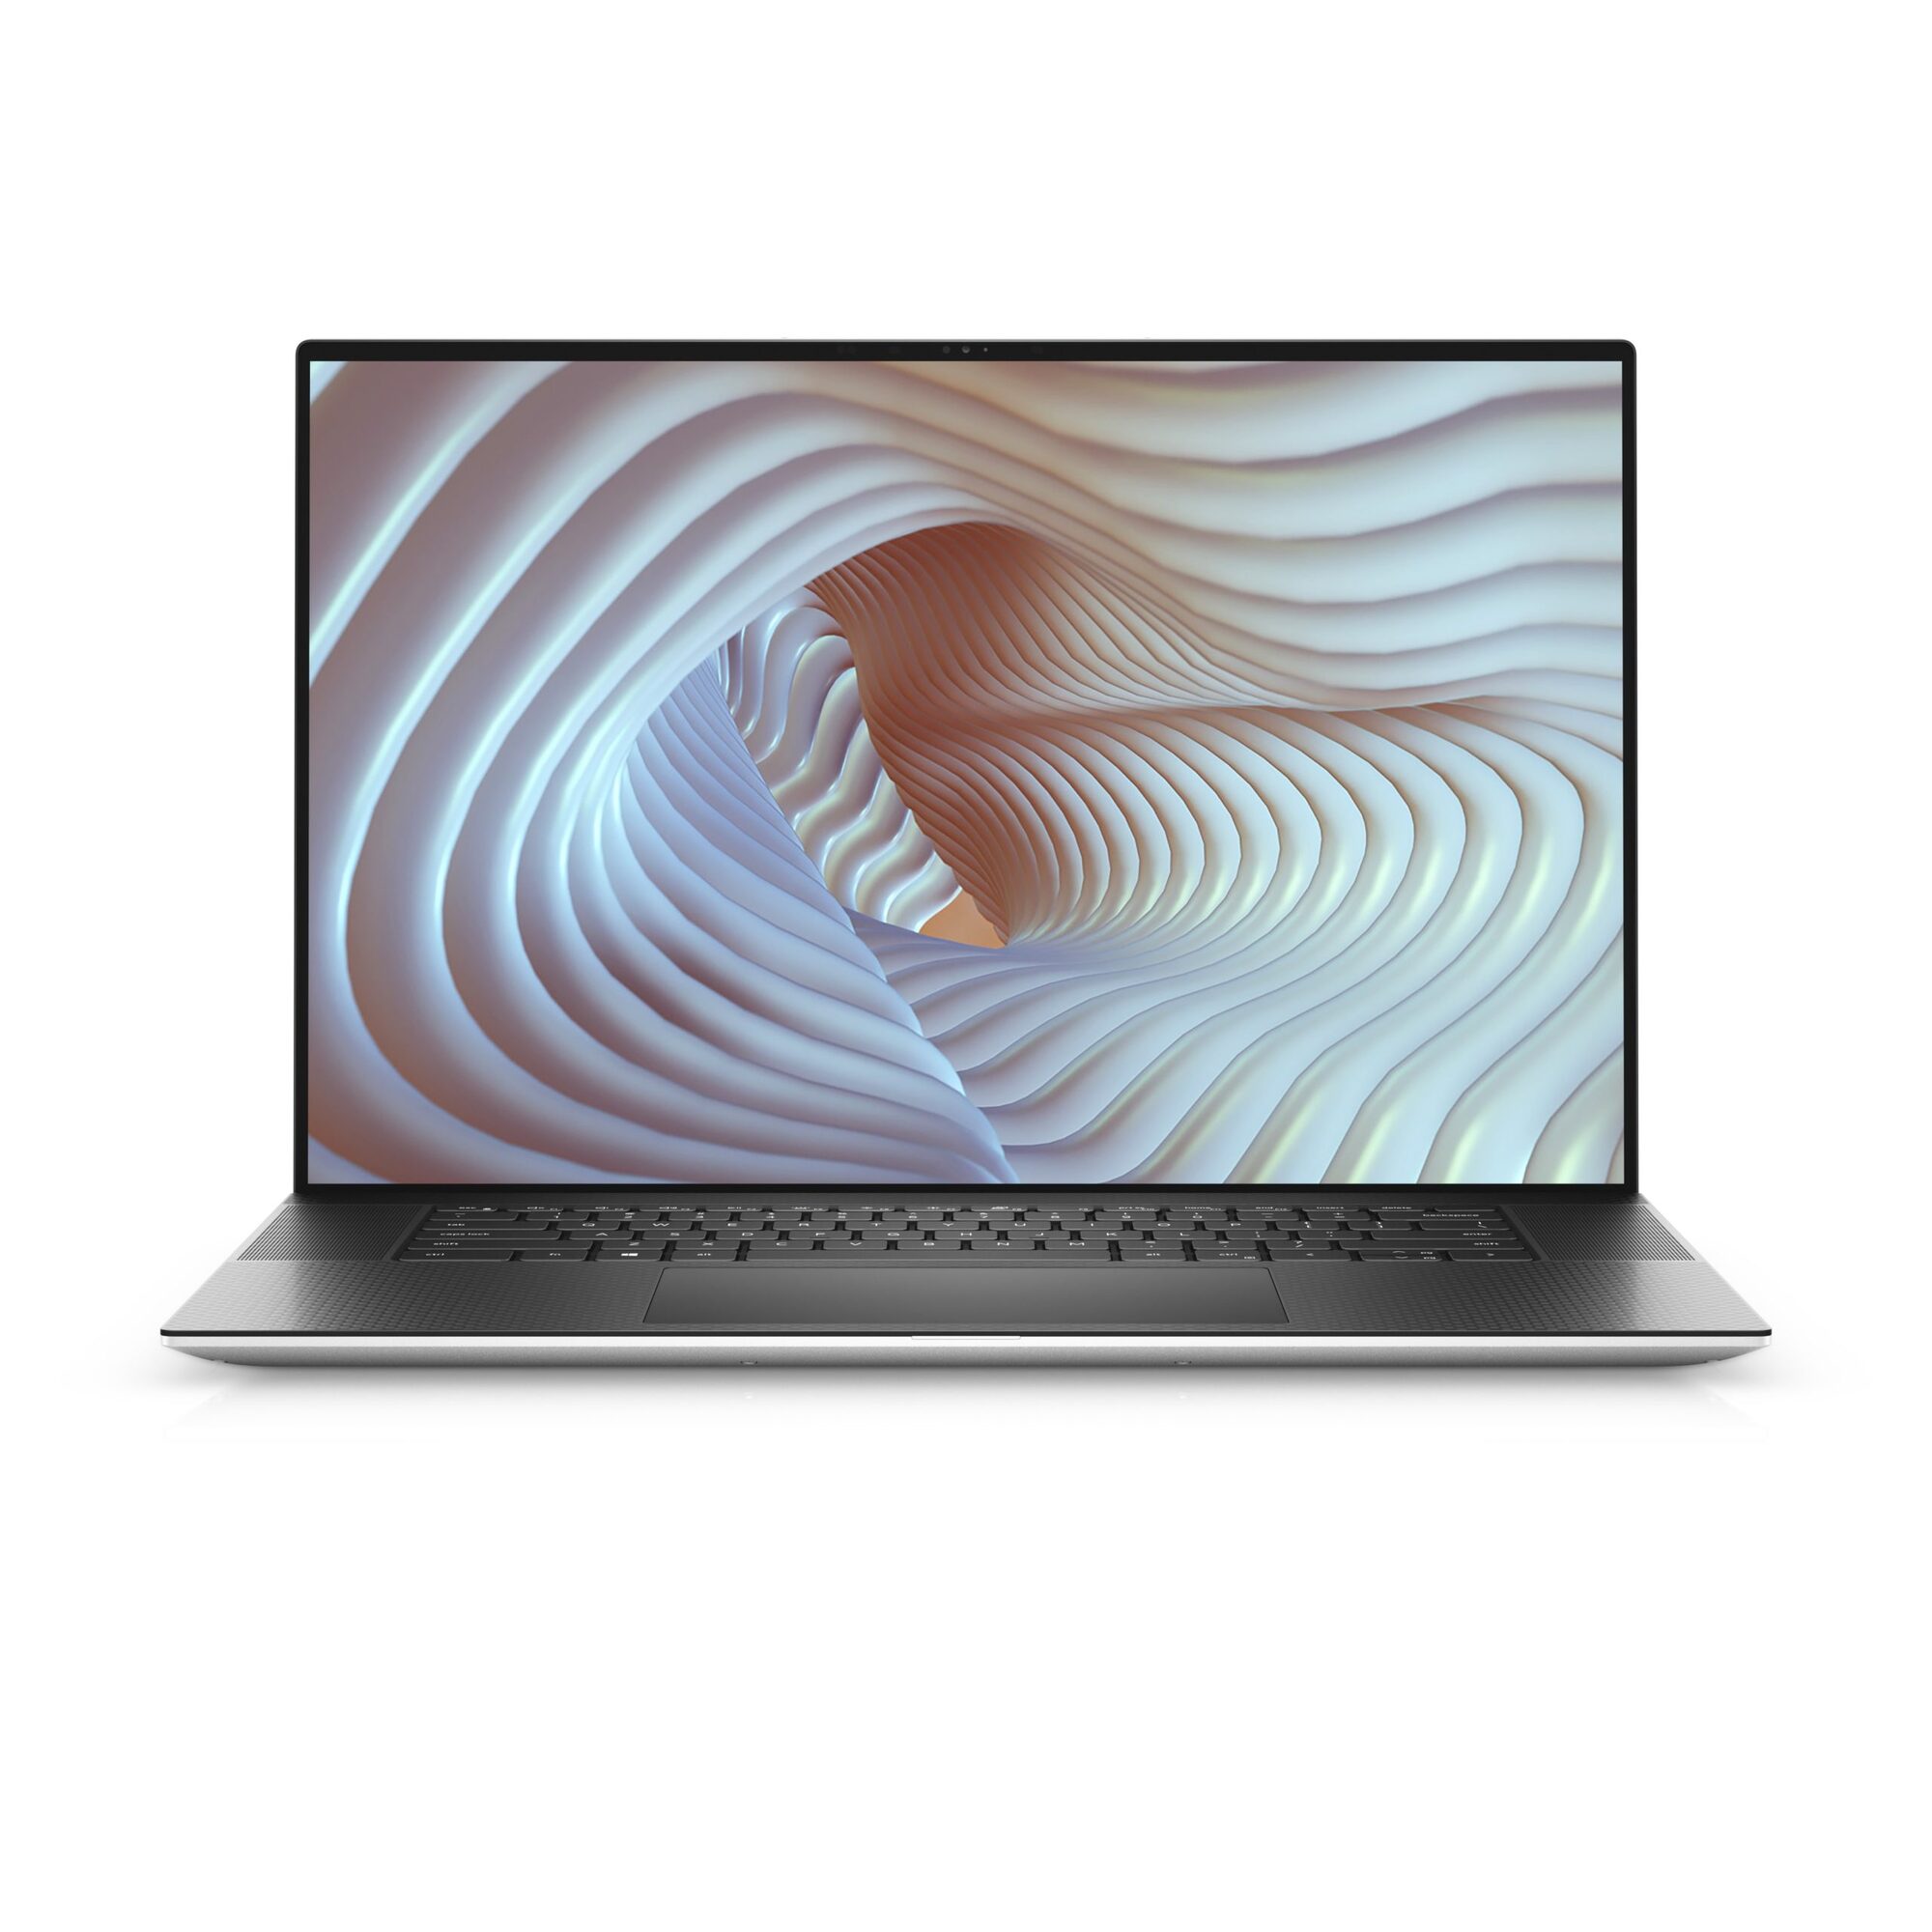 Dell introduces redesigned XPS 15 and XPS 17 f9c6cea713adeb4d577f54abe8a889fd-scaled.jpg